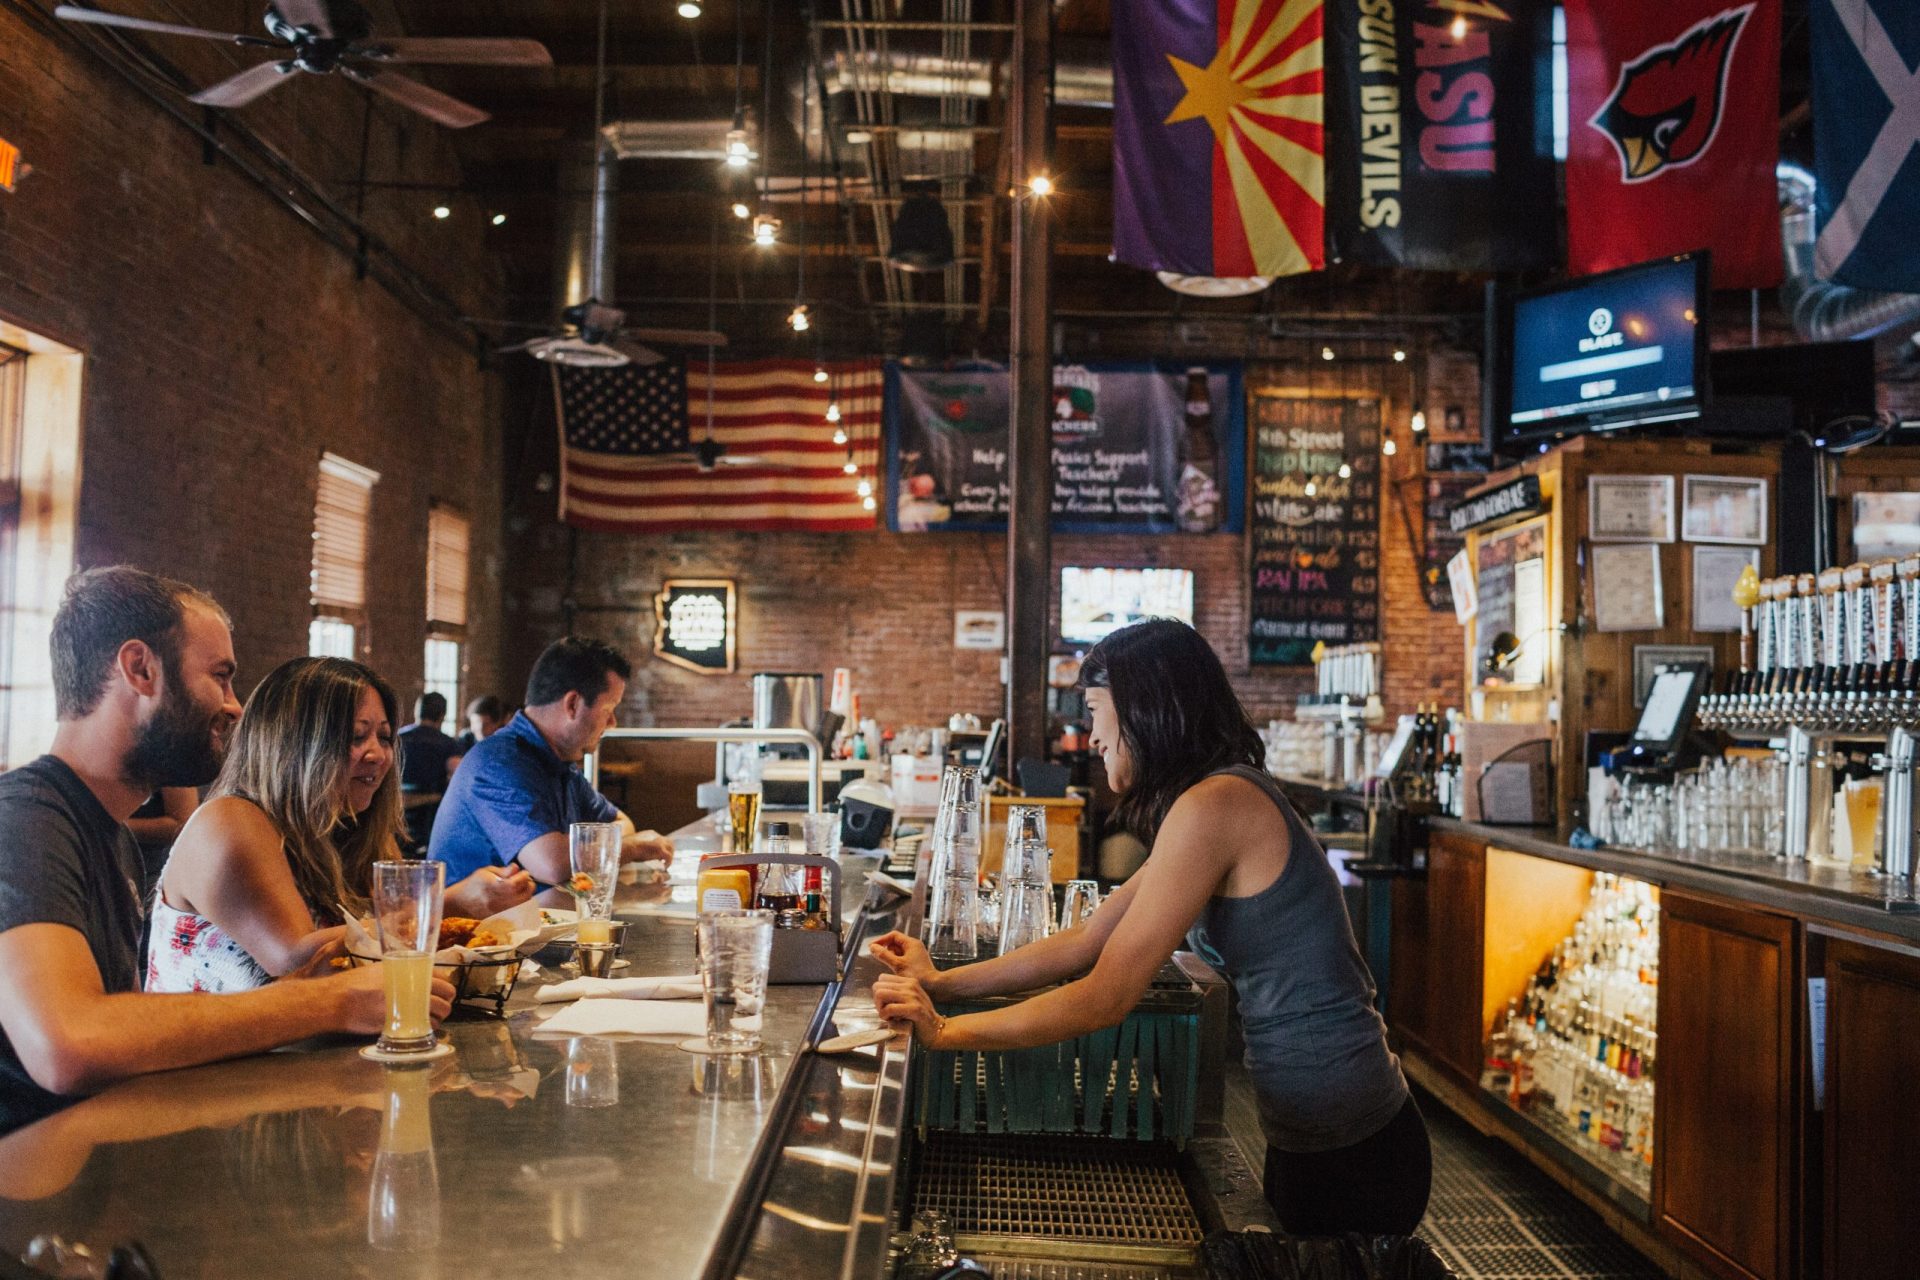 four peaks brewery craft beer tempe - 12 Great Places for Craft Beer in Tempe, Arizona